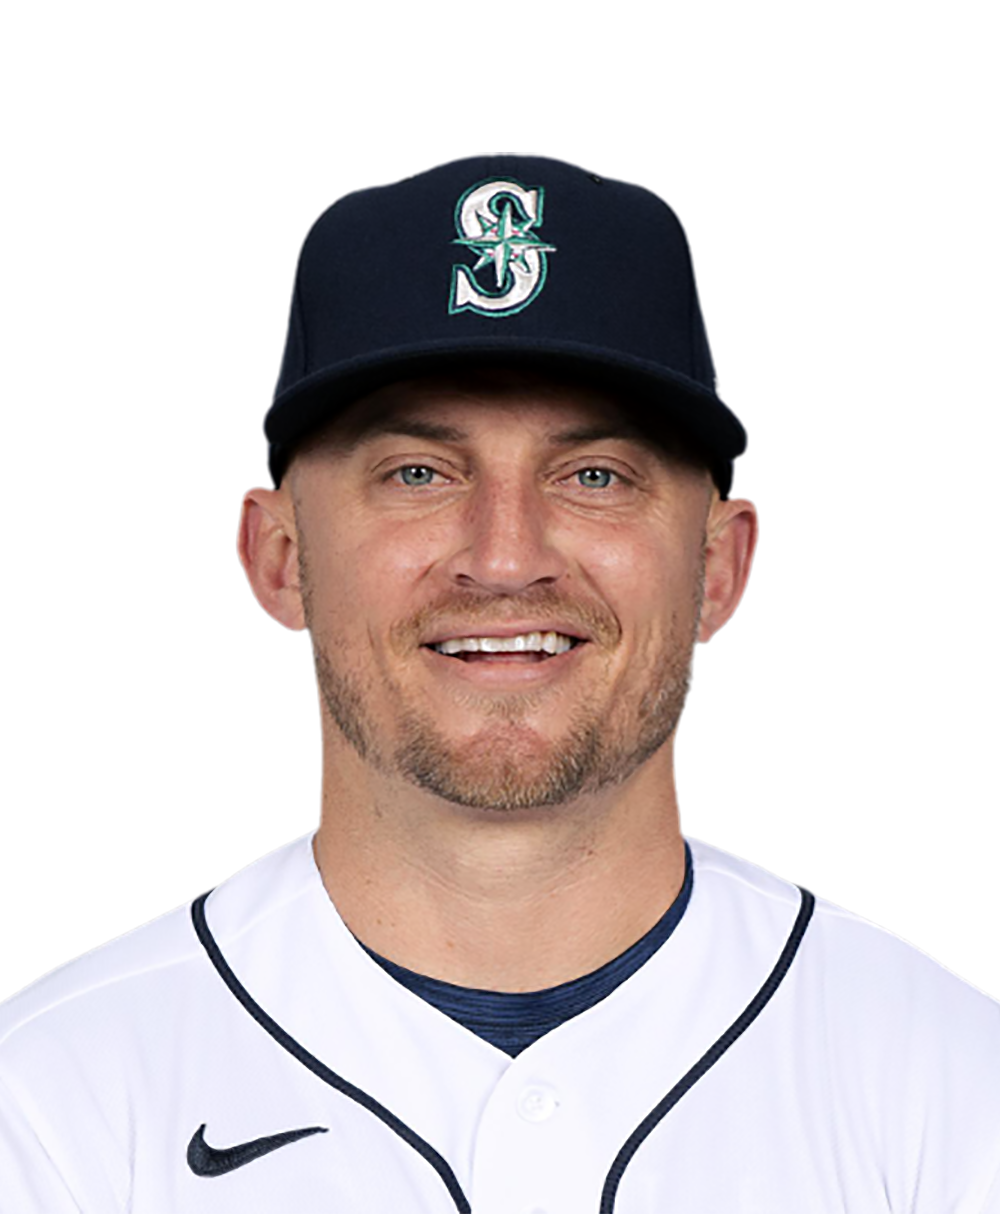 Kyle Seager, Ty France HR, Mariners top A's, move up in playoff race